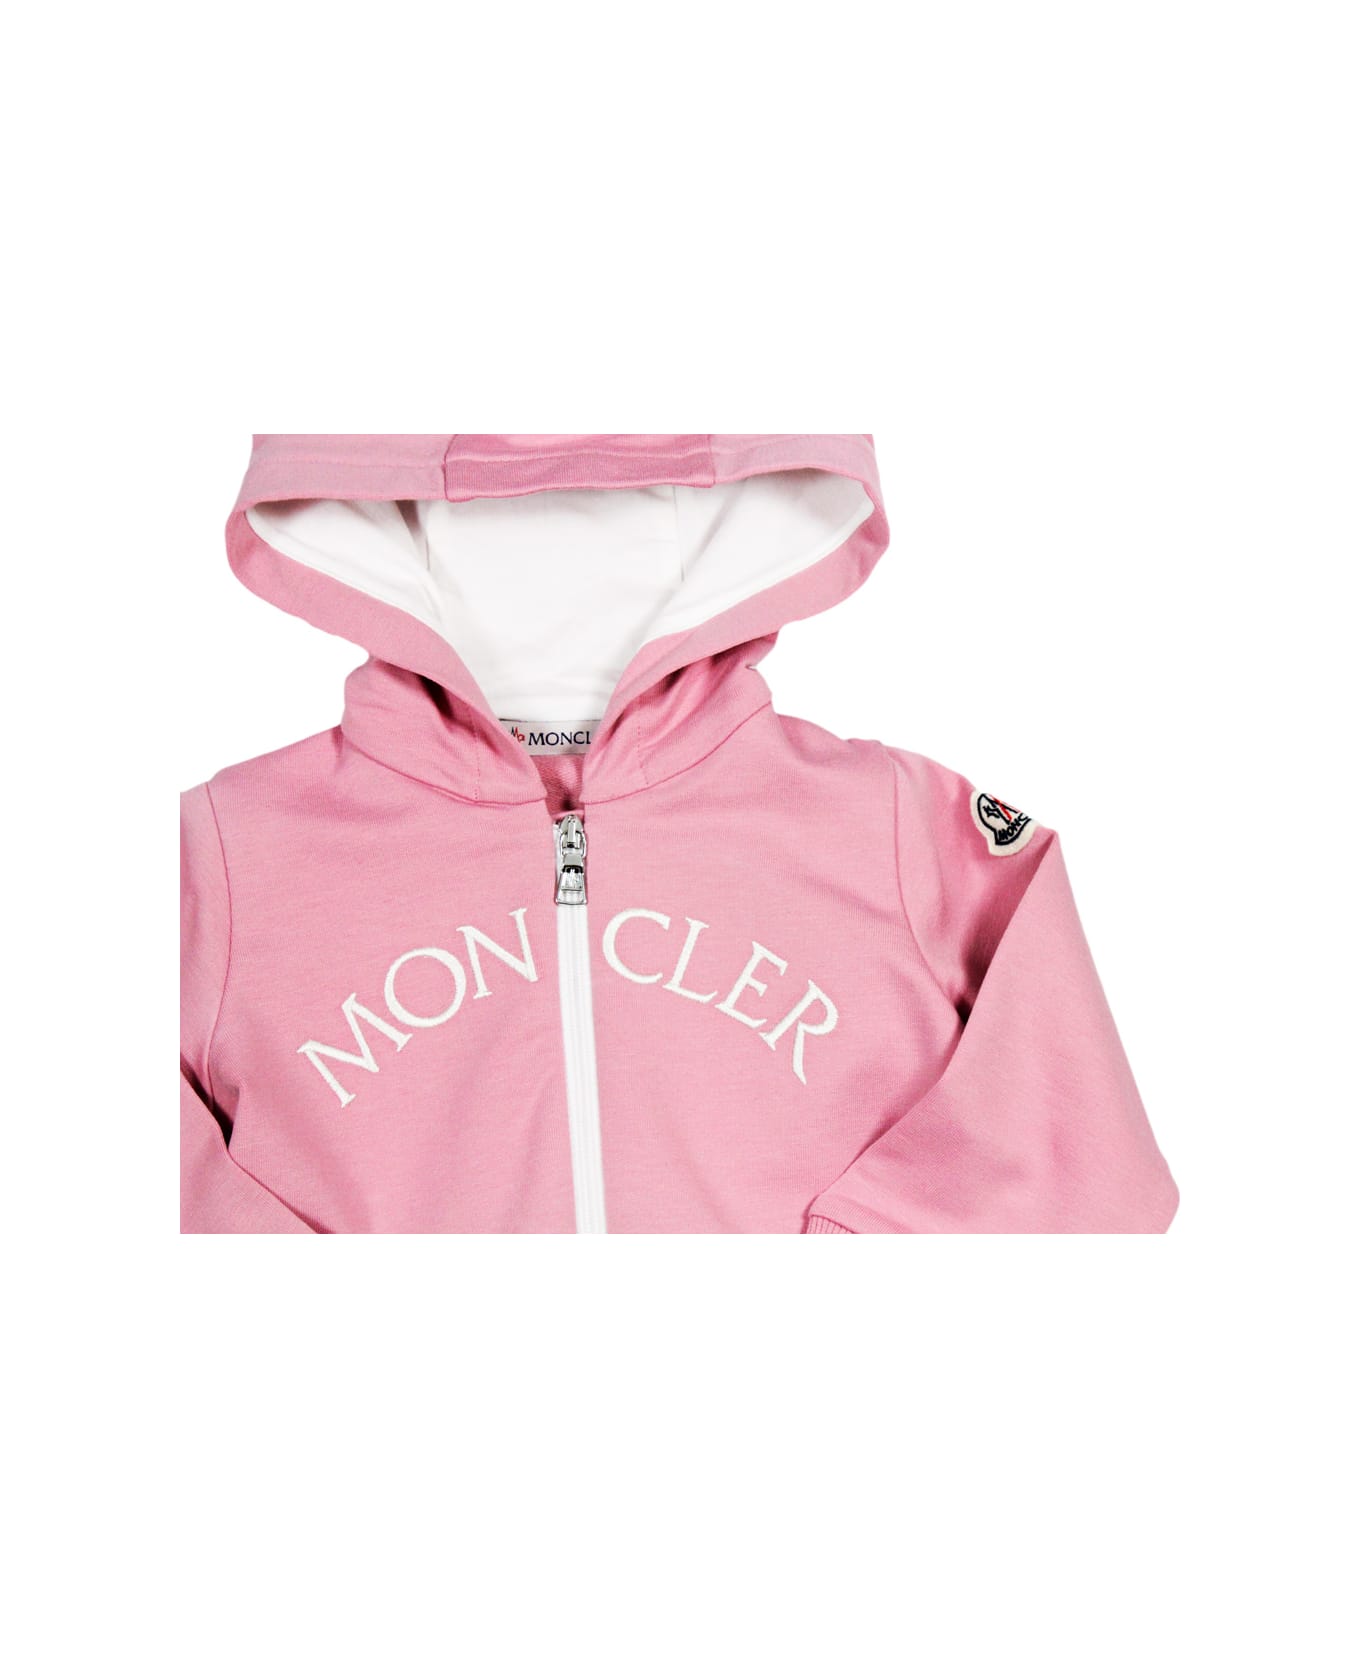 Moncler Cotton Sweatshirt With Zip And Hood And Logo Lettering On The Front - Pink ニットウェア＆スウェットシャツ